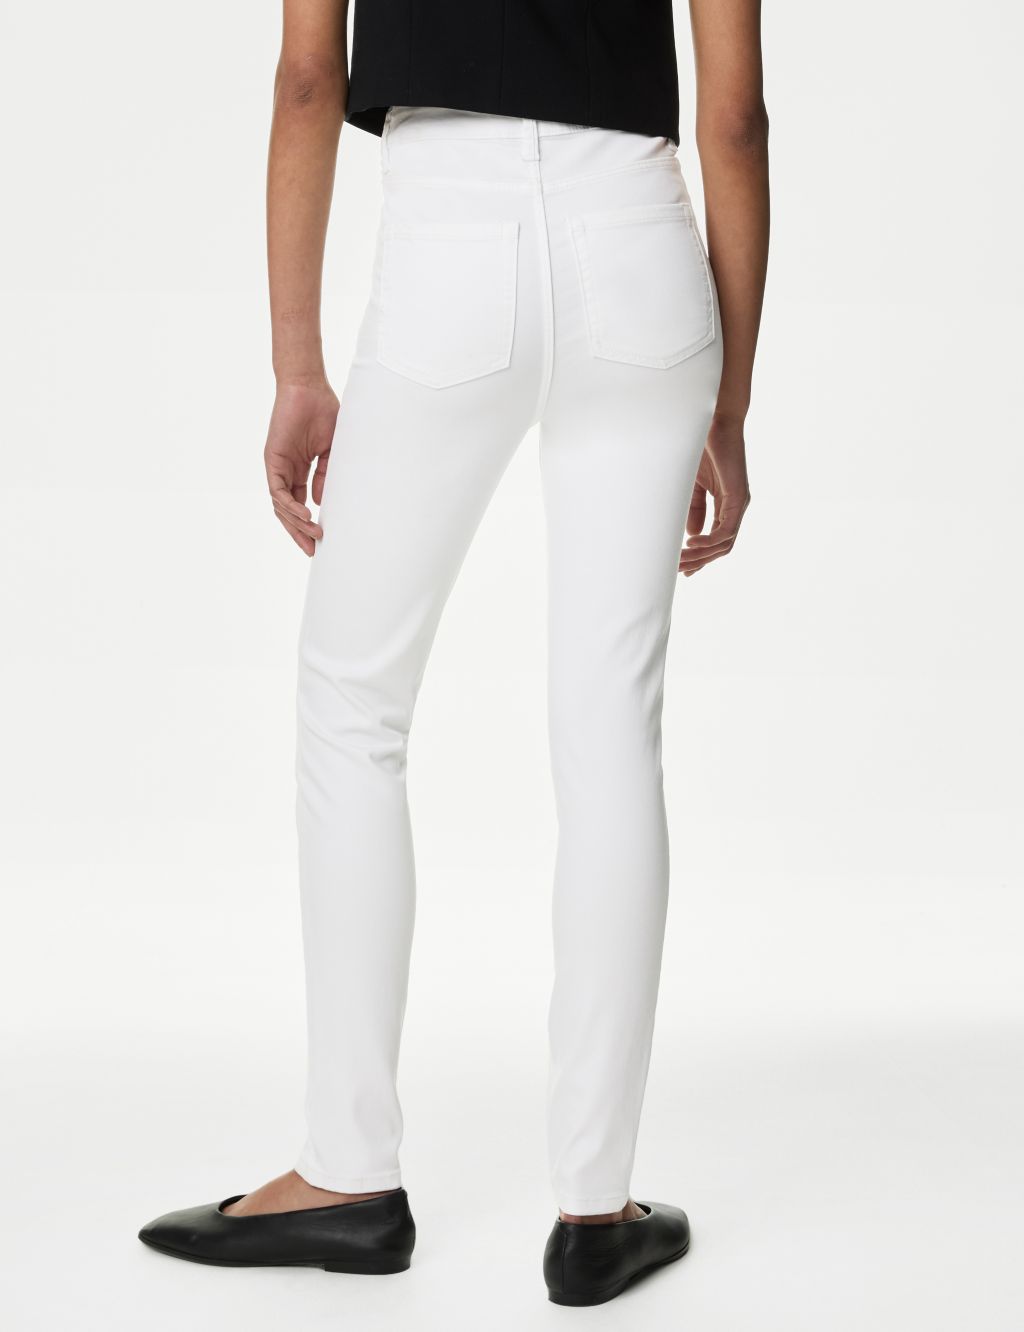 Ivy Supersoft High Waisted Skinny Jeans image 4